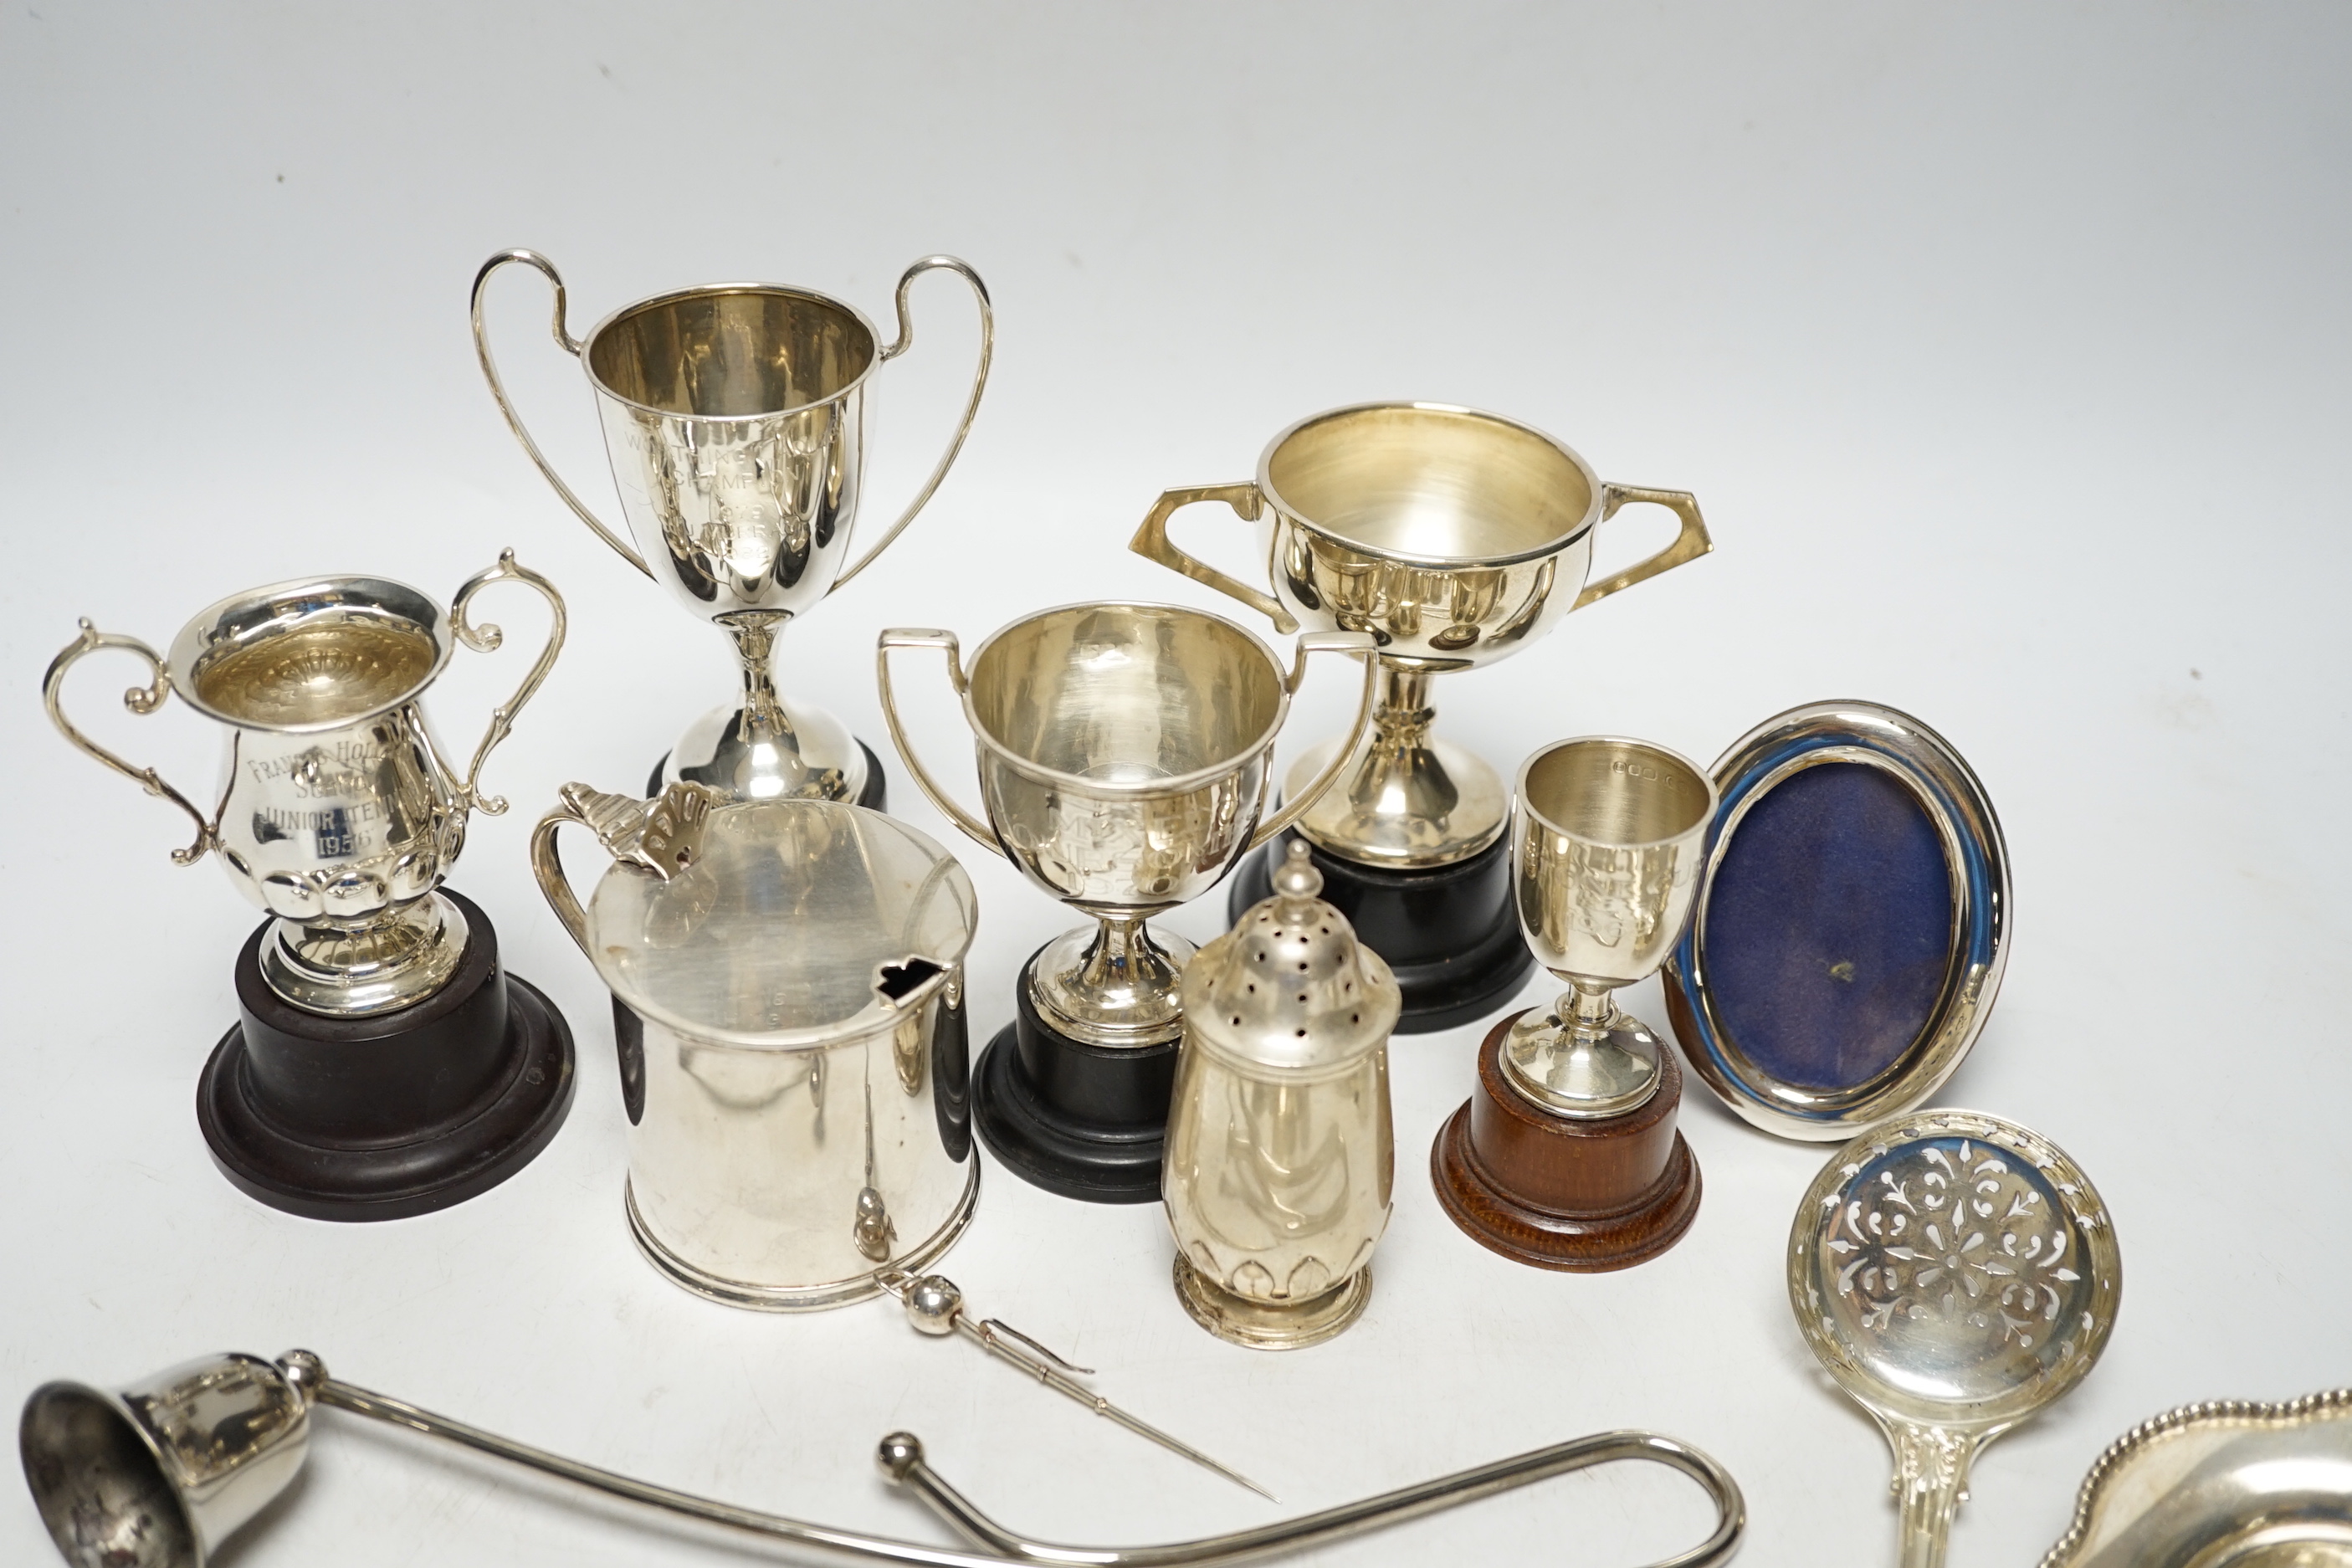 Sundry minor silver flatware including a Victorian Kings pattern sifter ladle, a silver mustard pot and pepperette, four small silver trophy cups and two other items.